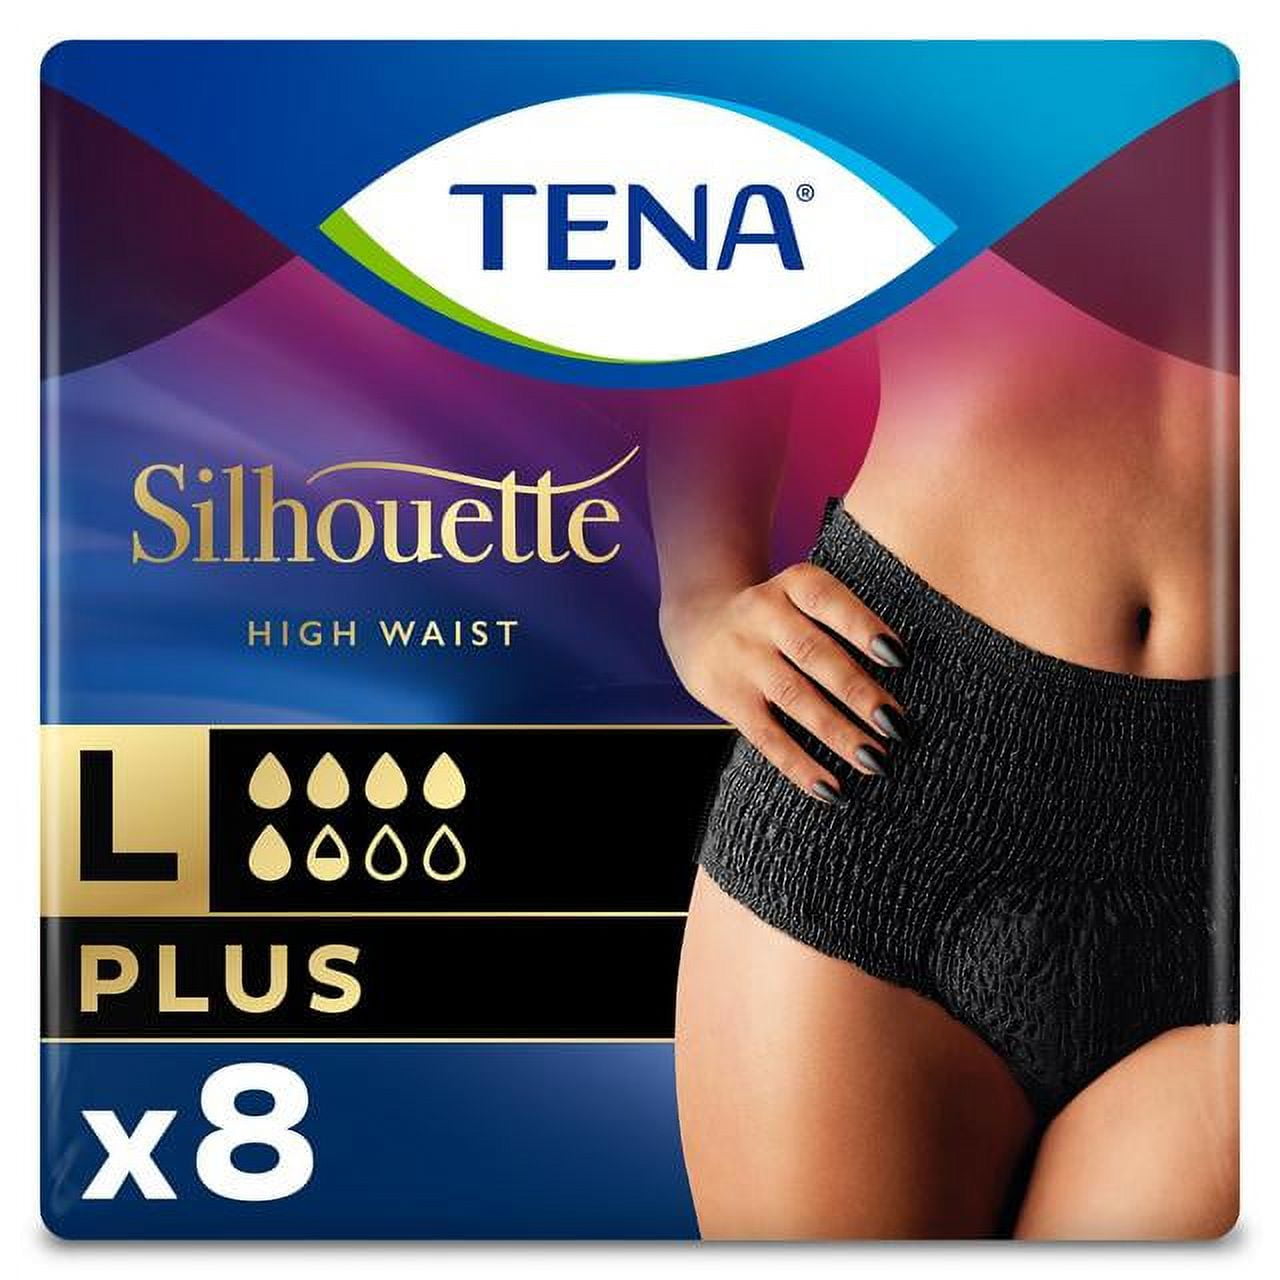 TENA Silhouette Black Incontinence Pads 18 pack, Toiletries